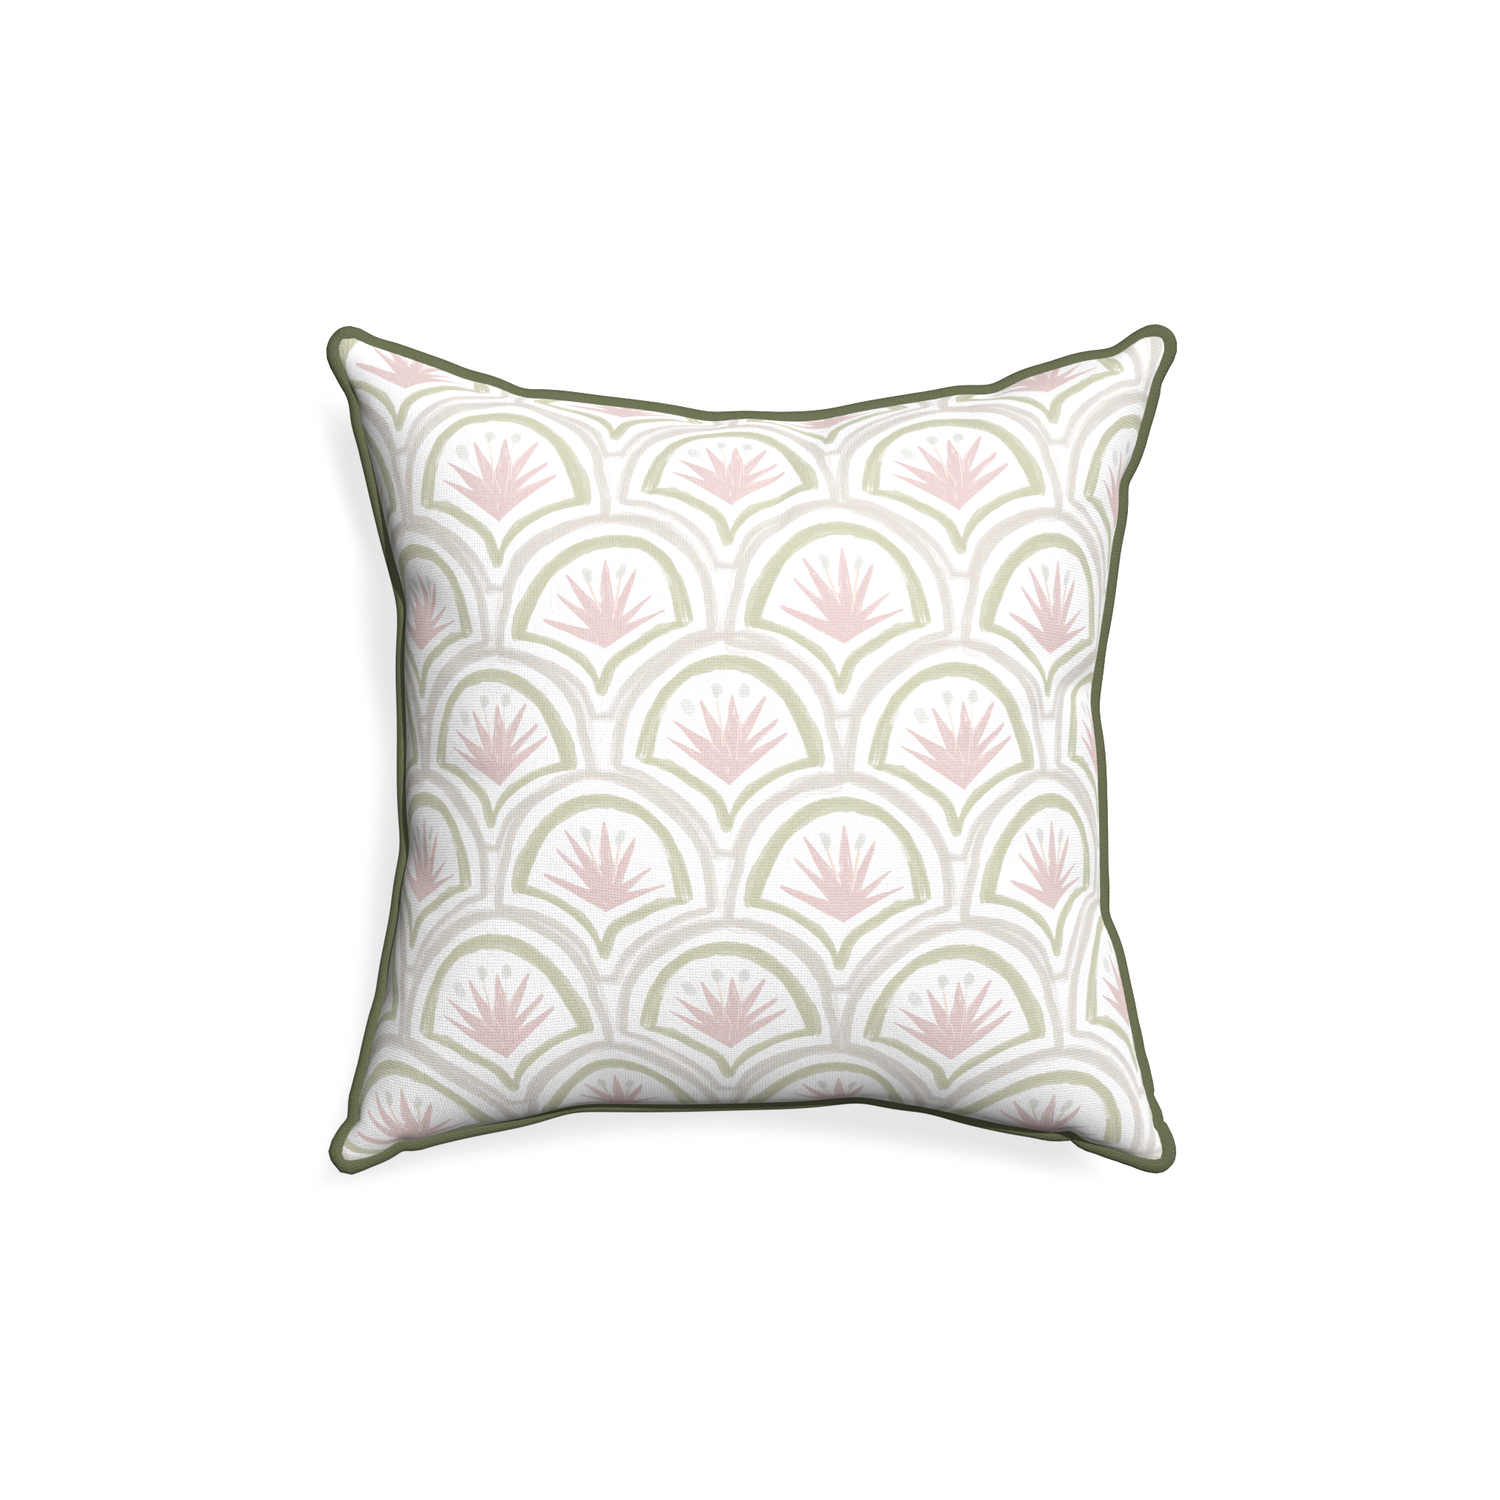 18-square thatcher rose custom pillow with f piping on white background